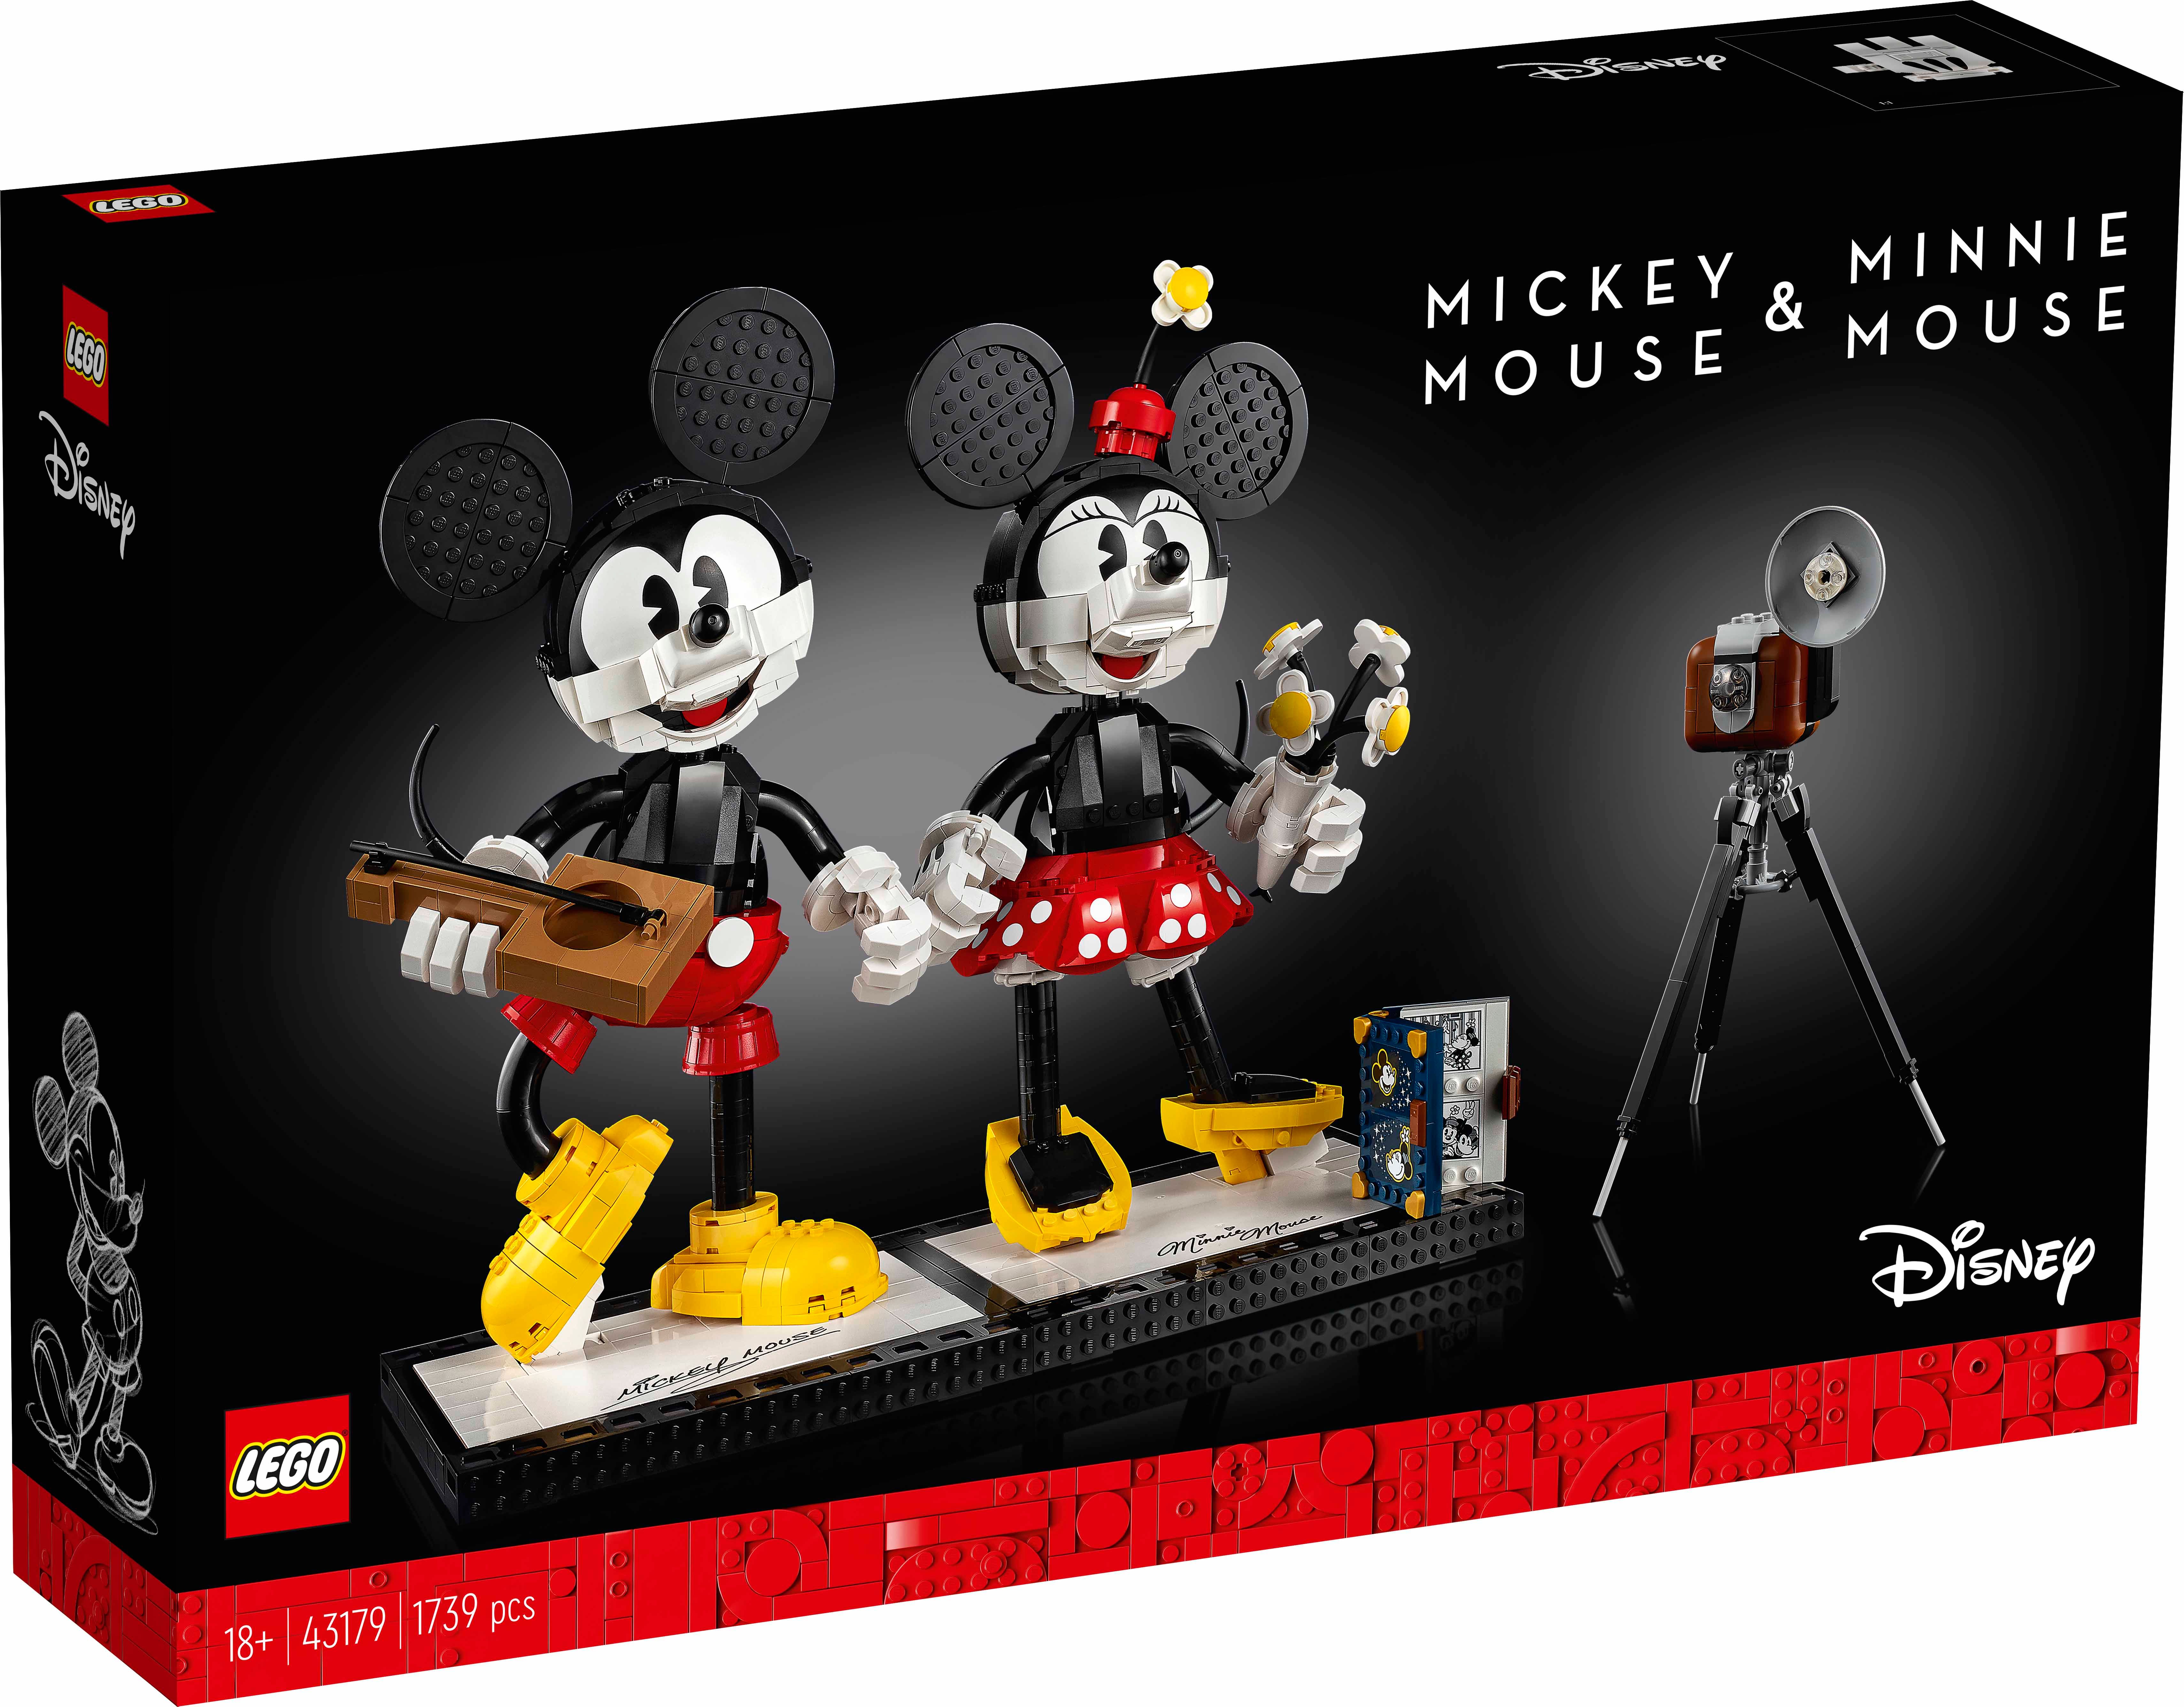 LEGO Debuts Buildable Disney Mickey and Minnie Mouse Playset